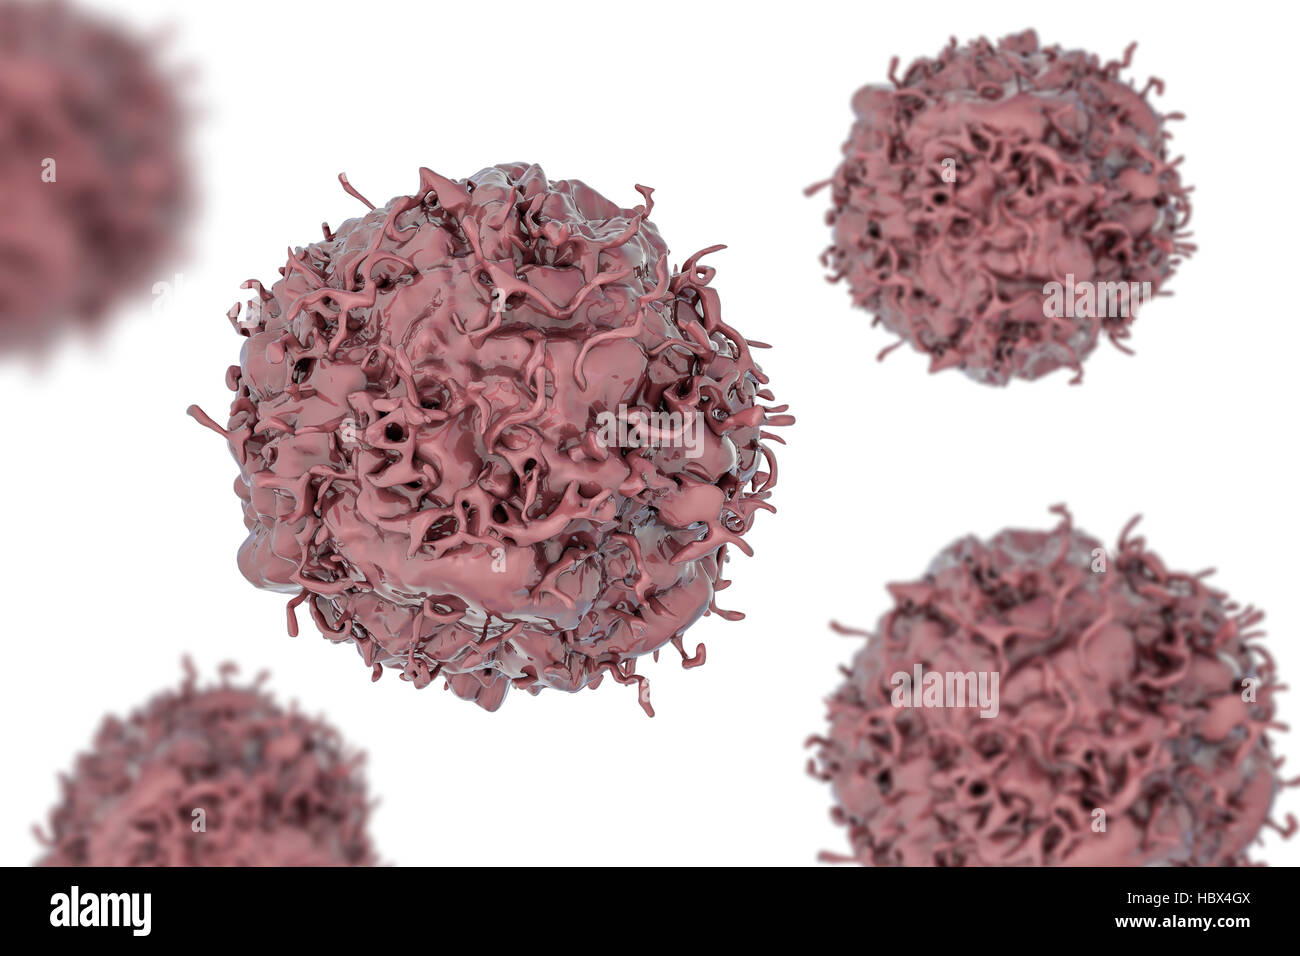 Lung cancer cell, computer illustration. Stock Photo